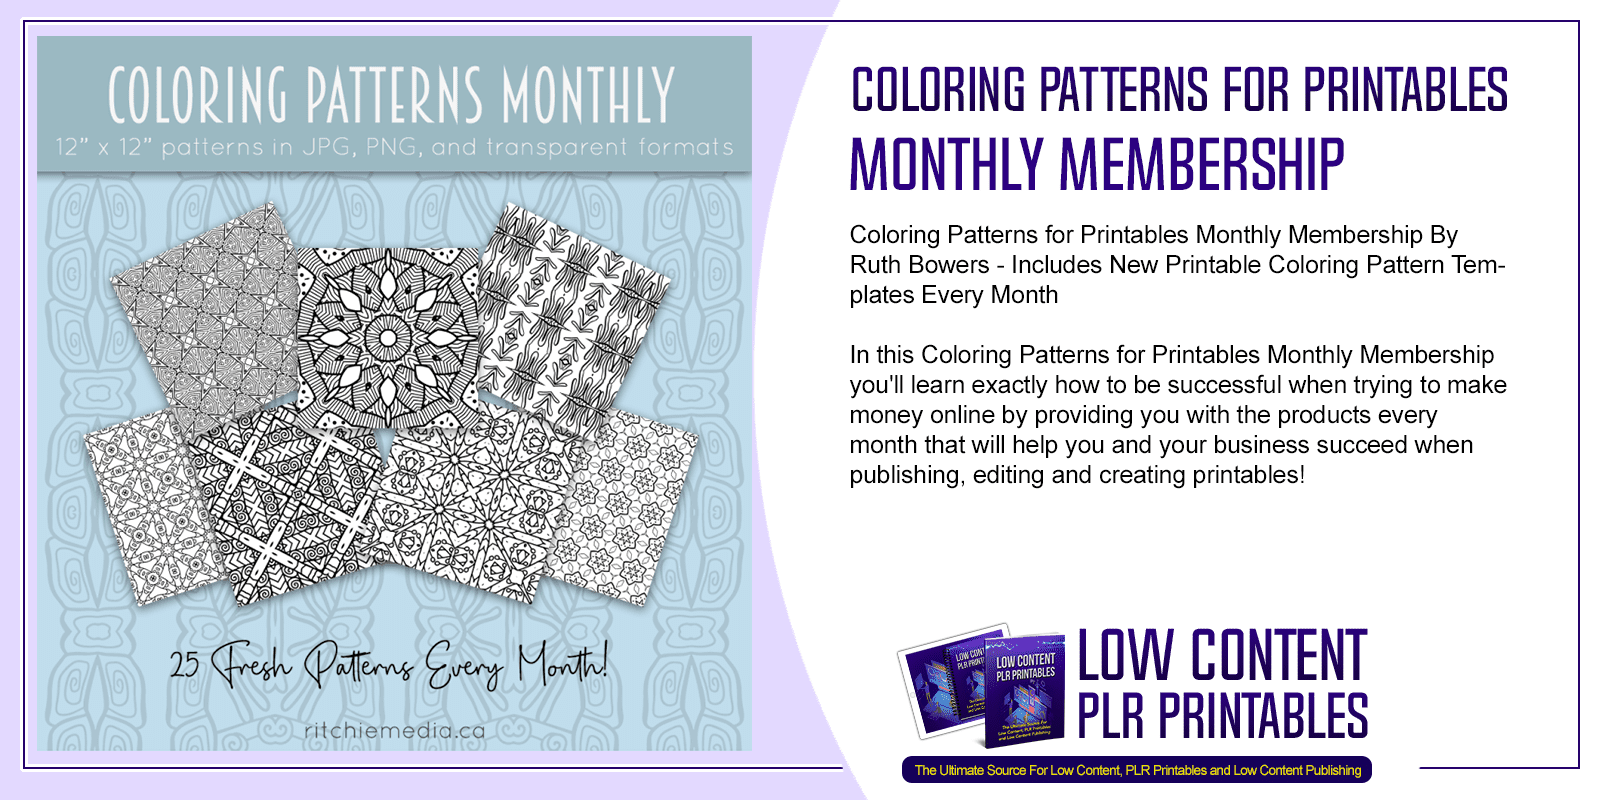 Coloring Patterns for Printables Monthly Membership